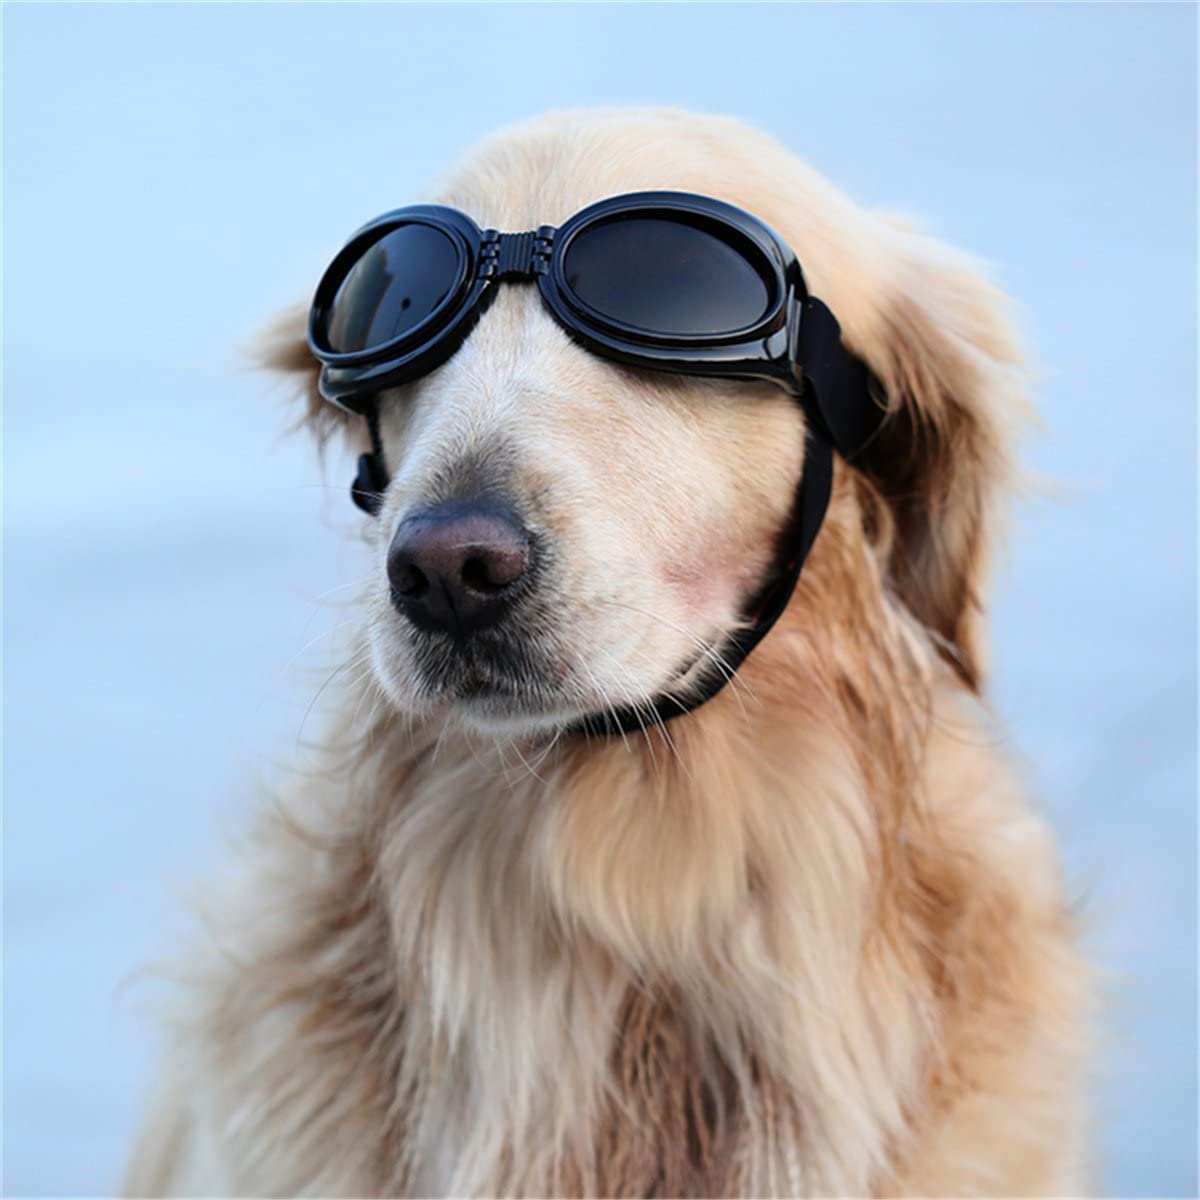 Why do k9 dogs wear goggles?